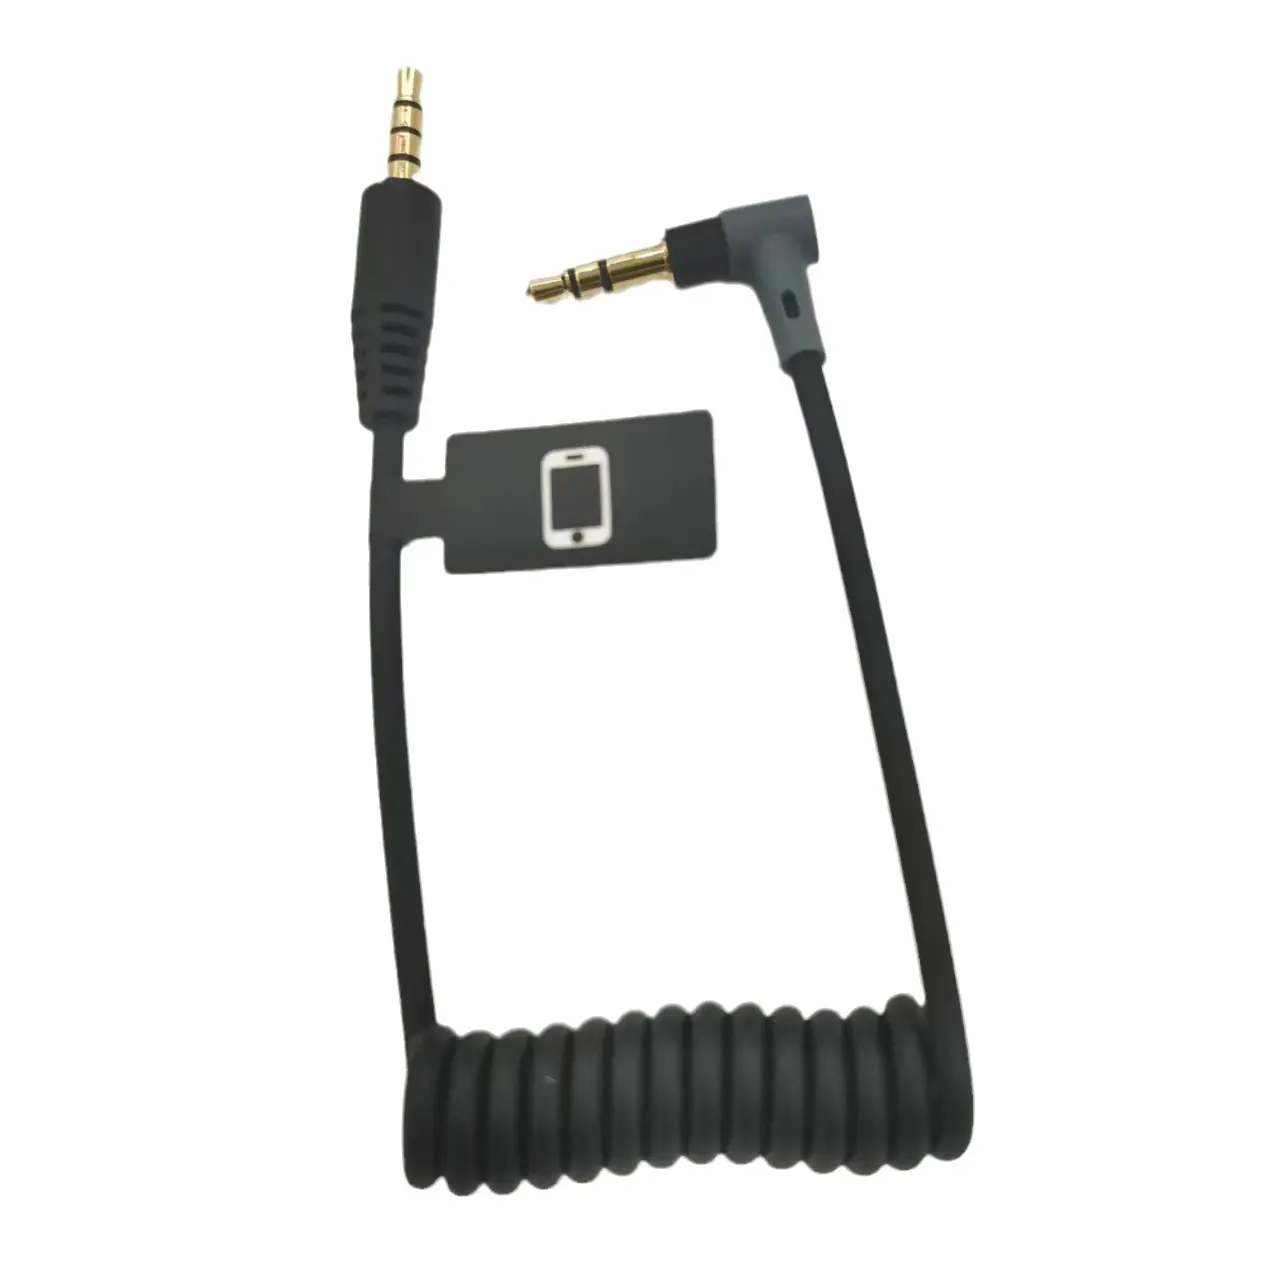 Hot 3.5mm TRS to TRS TRRS Patch Cable Microphone Cord 3.5mm Male to Male for Lark 150 M1 Tablet Cellphone PC DSLR Camera